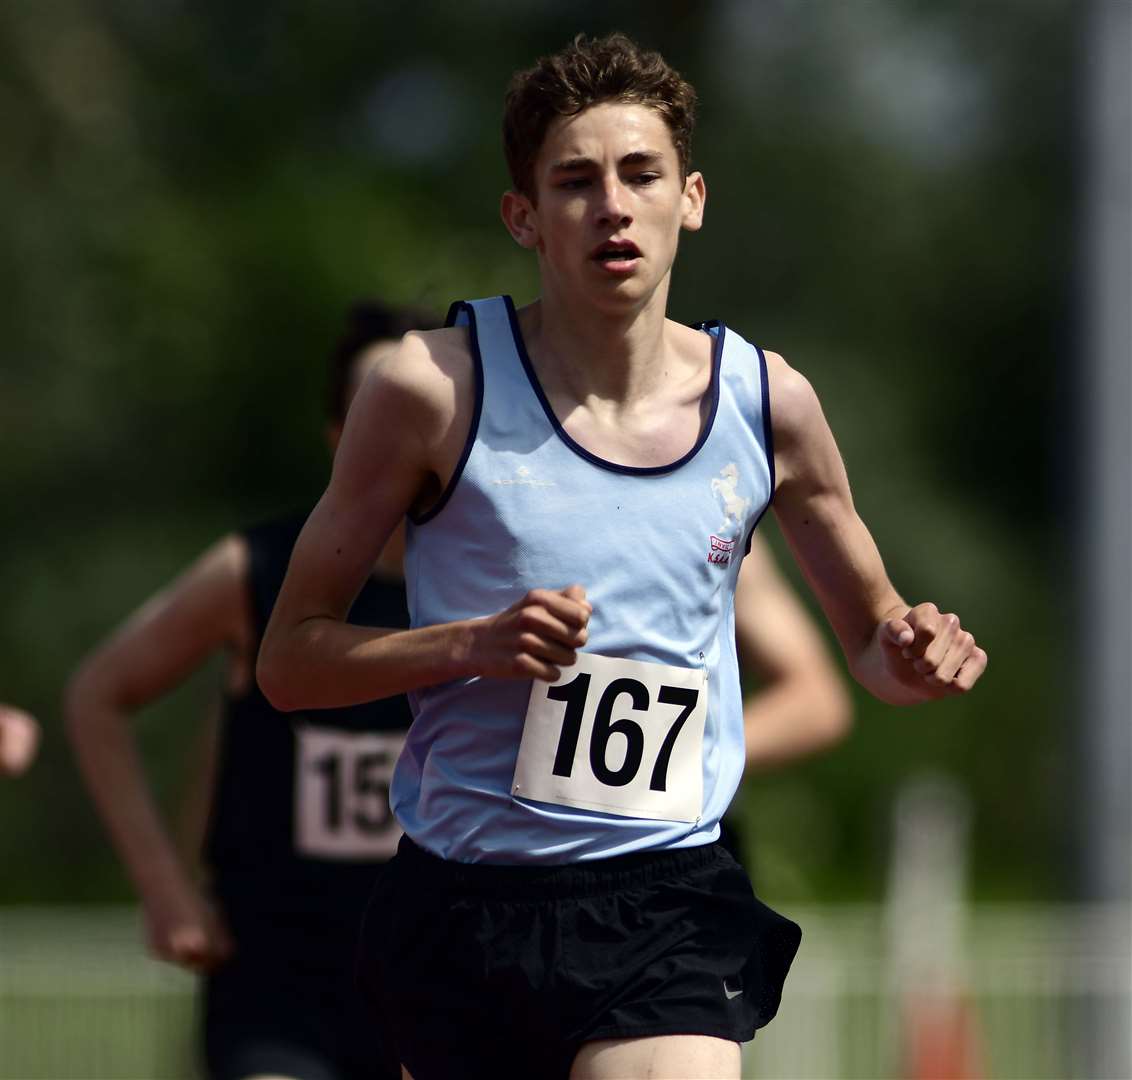 Jamie Keir (St Augustine's & Canterbury) in the 1500m Picture: Barry Goodwin